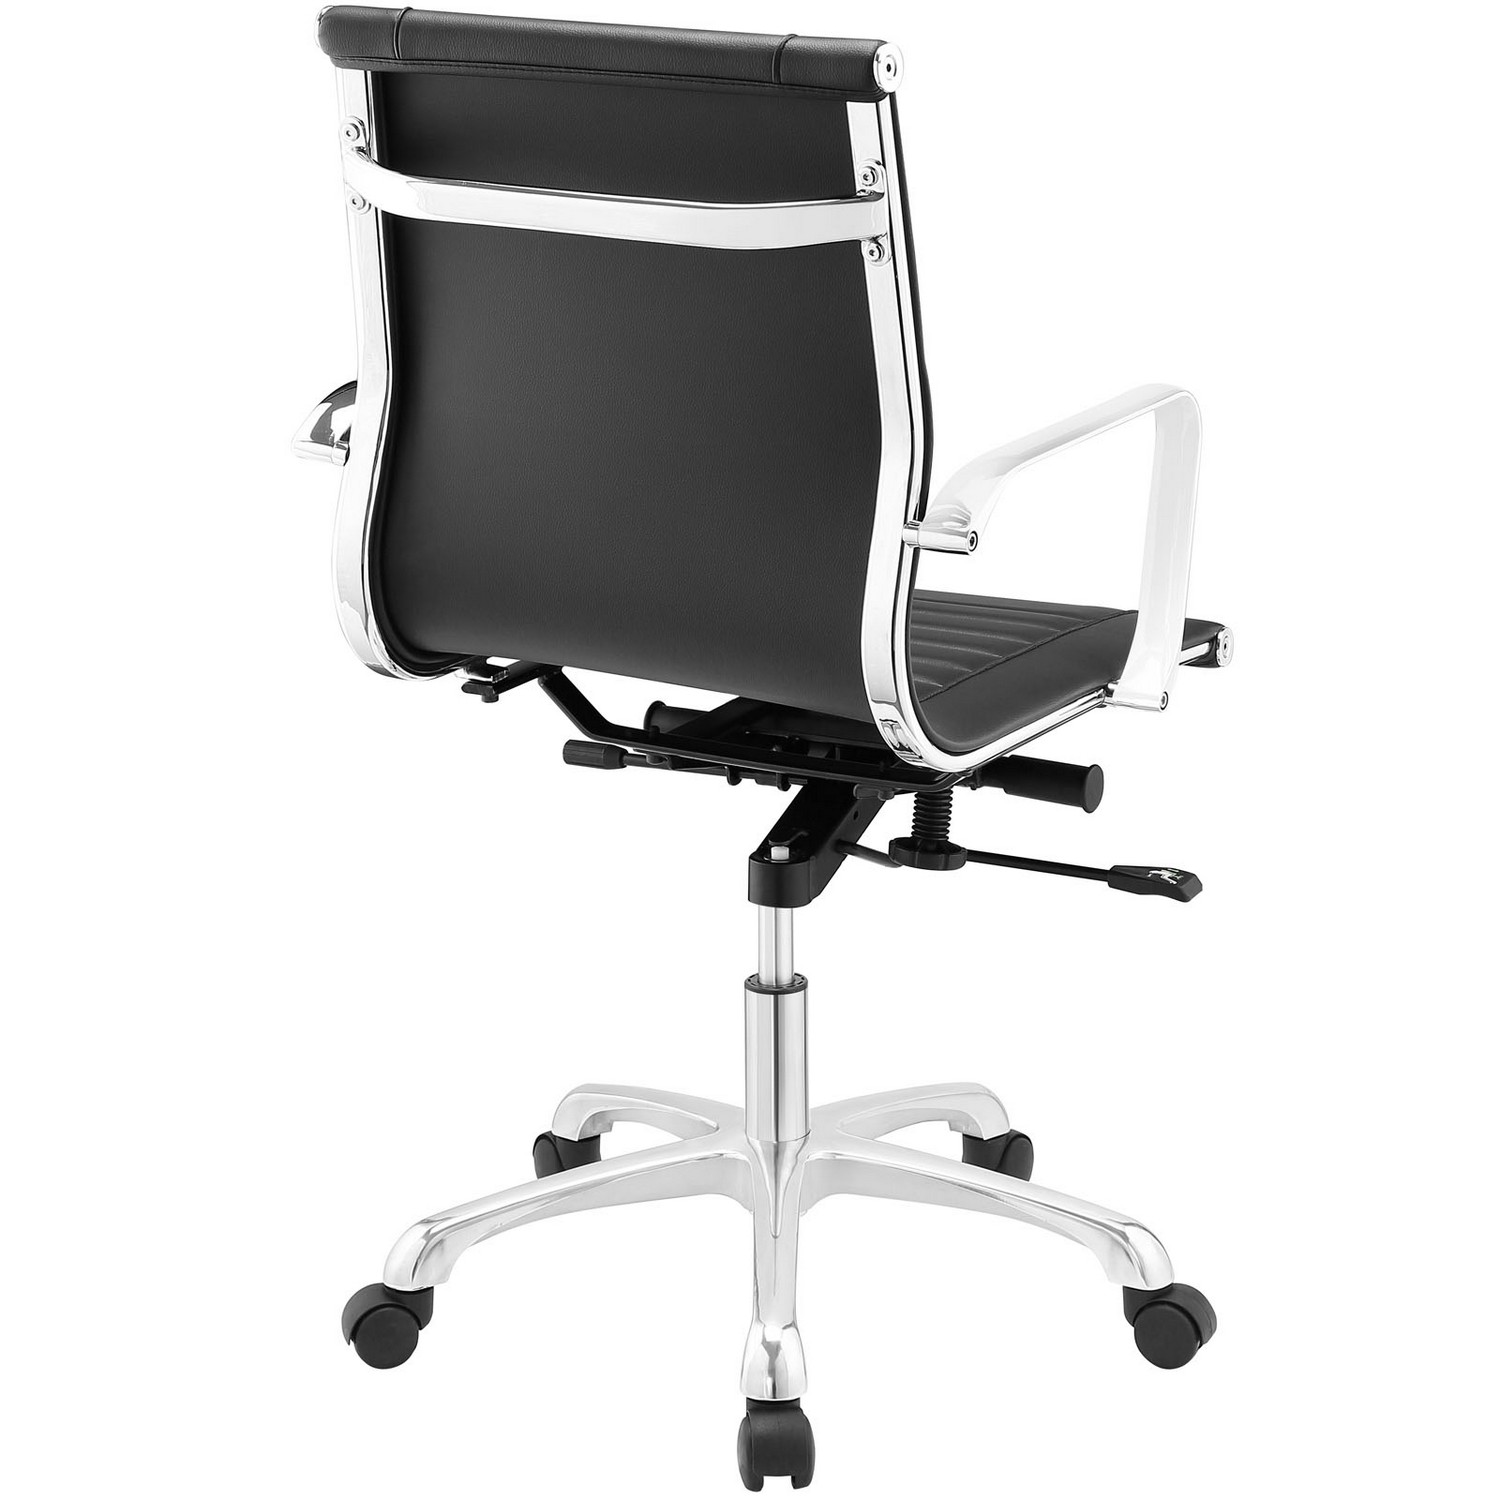 Modway Runway Mid Back Office Chair - Black